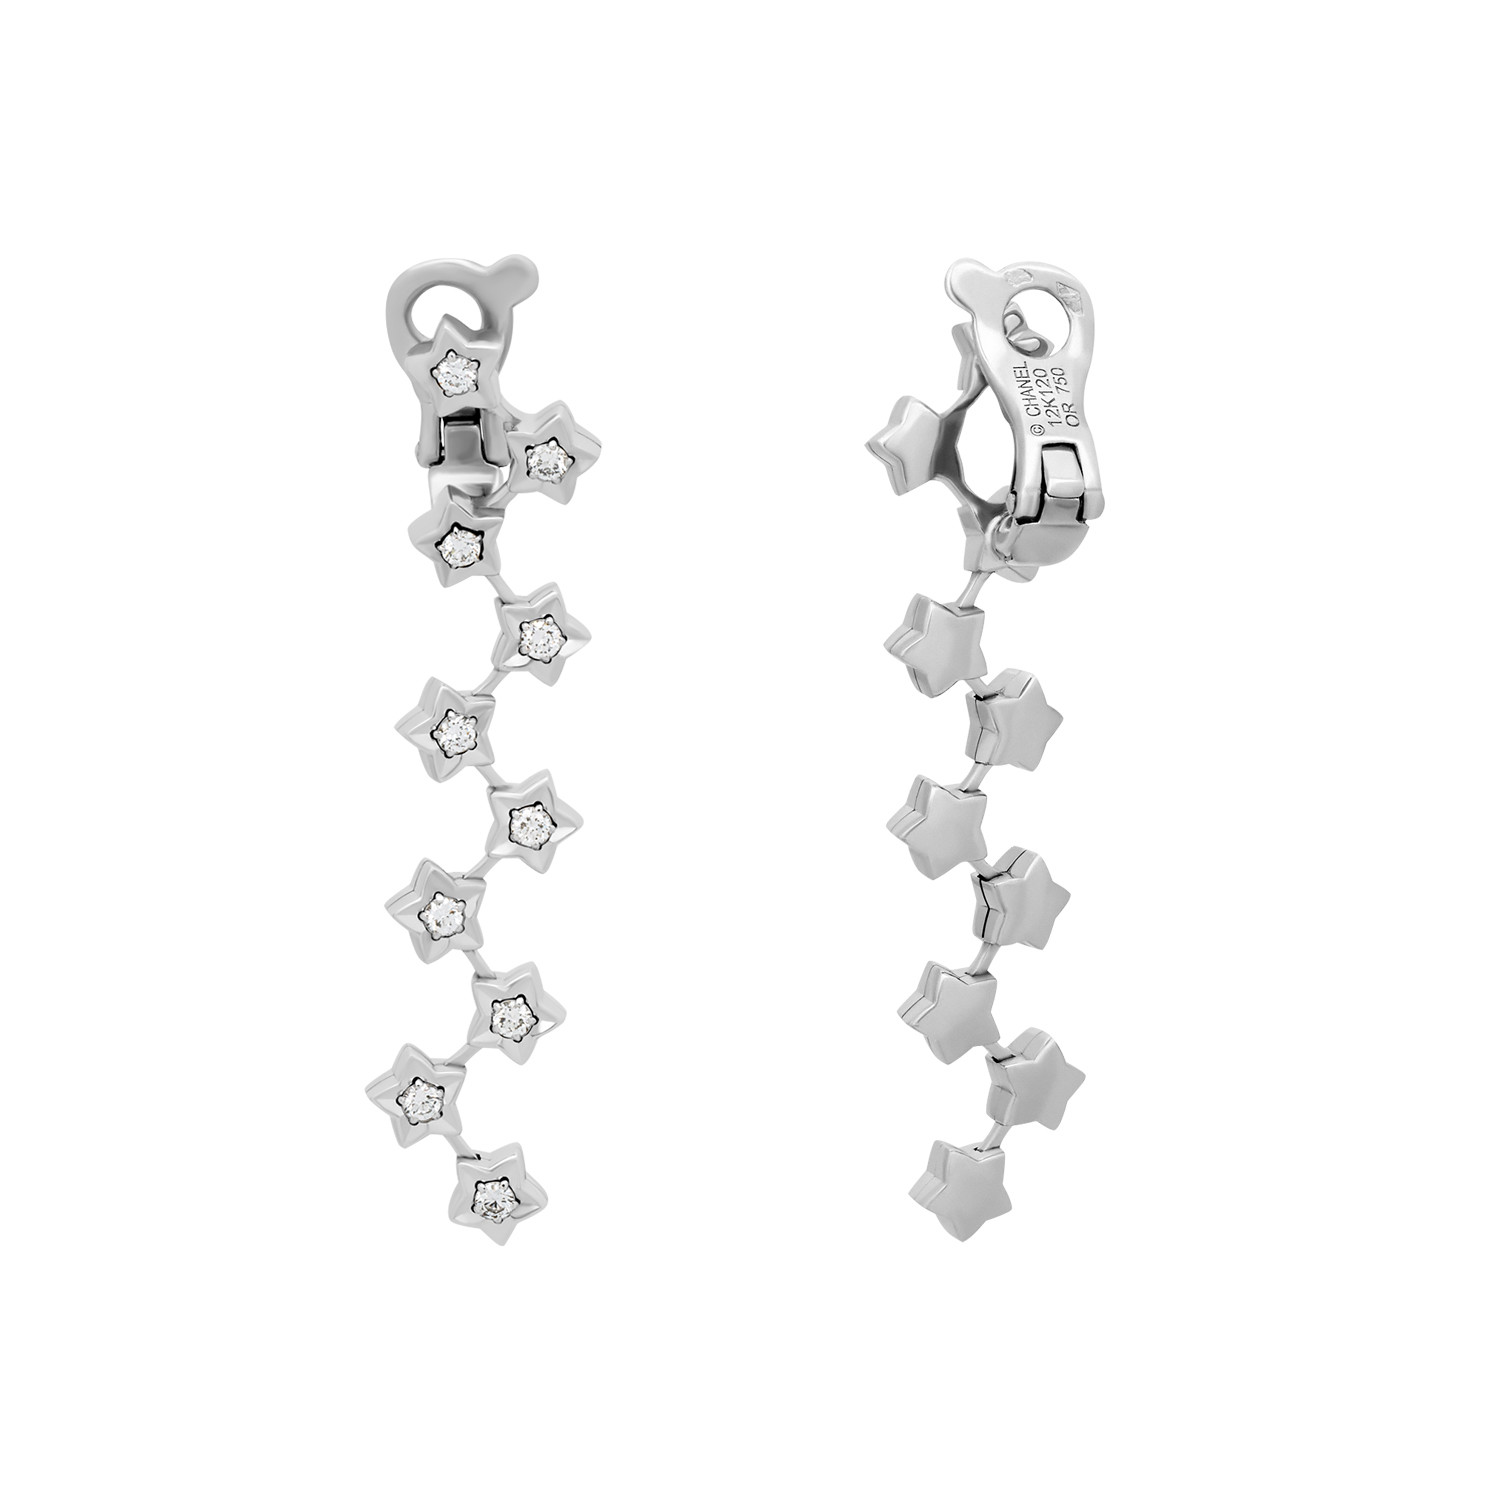 CHANEL Small White Gold And Diamond Comète Earrings